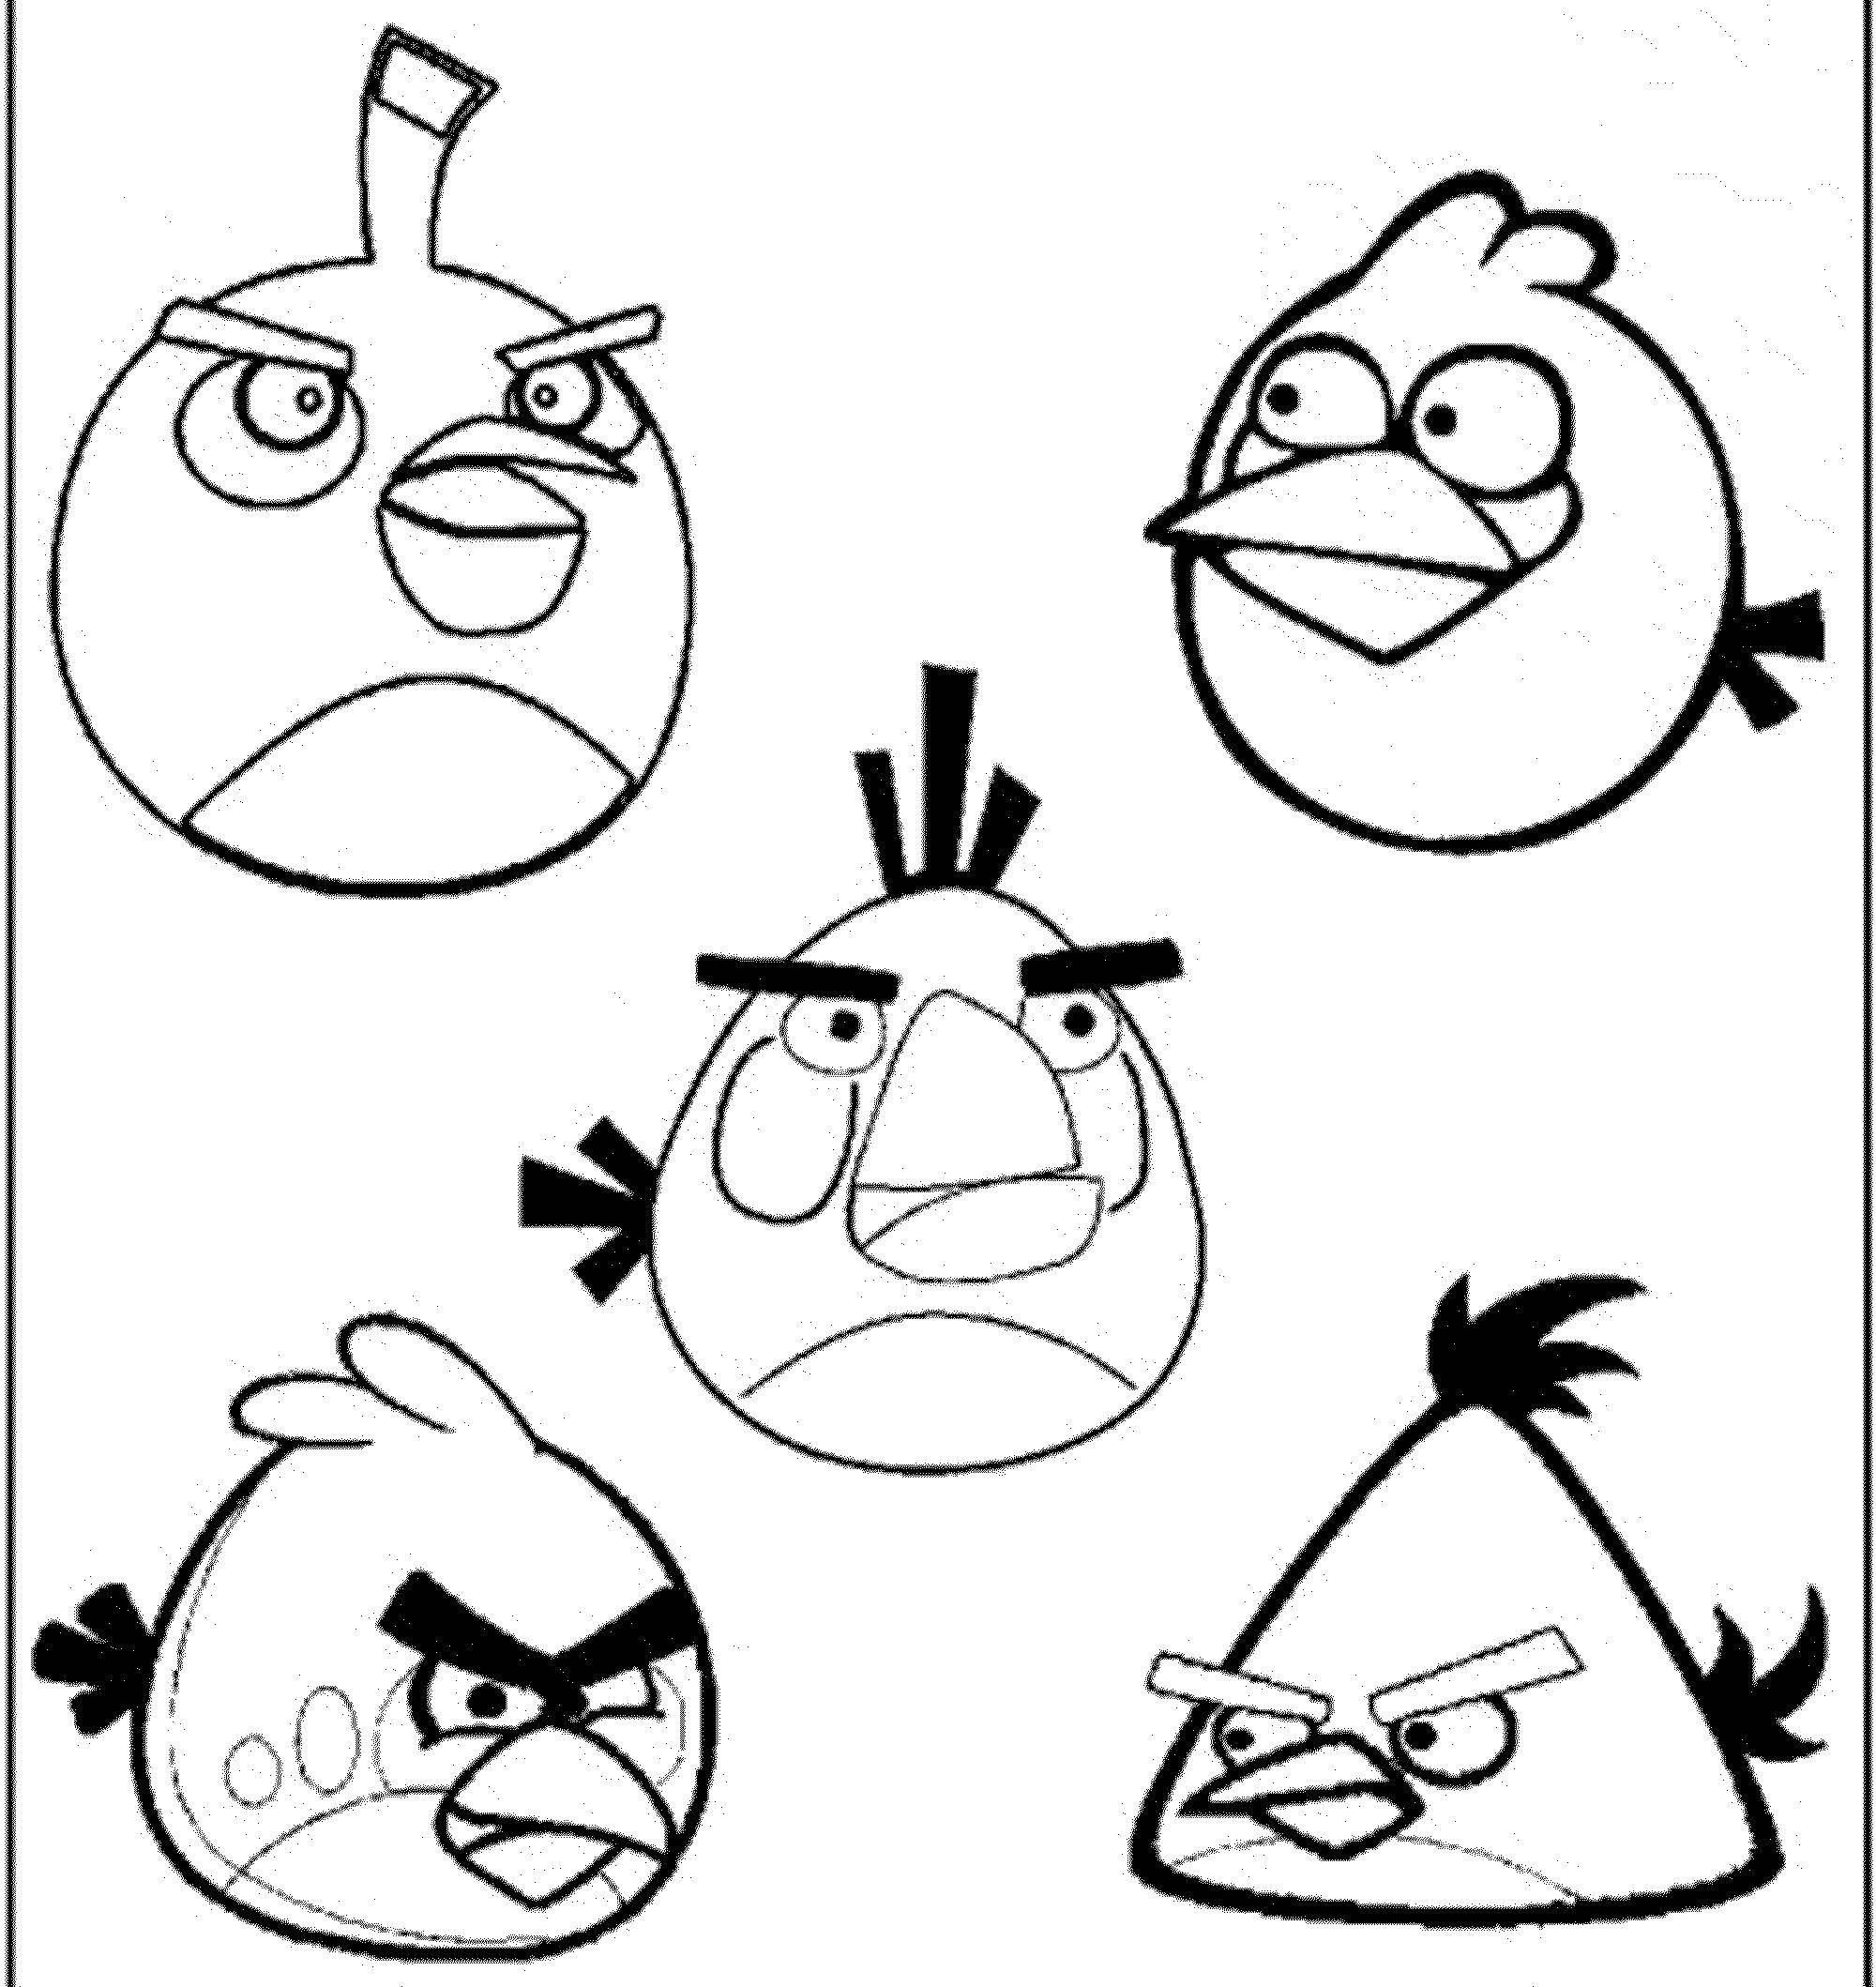 Coloring Birds angry birds. Category angry birds. Tags:  angry birds.